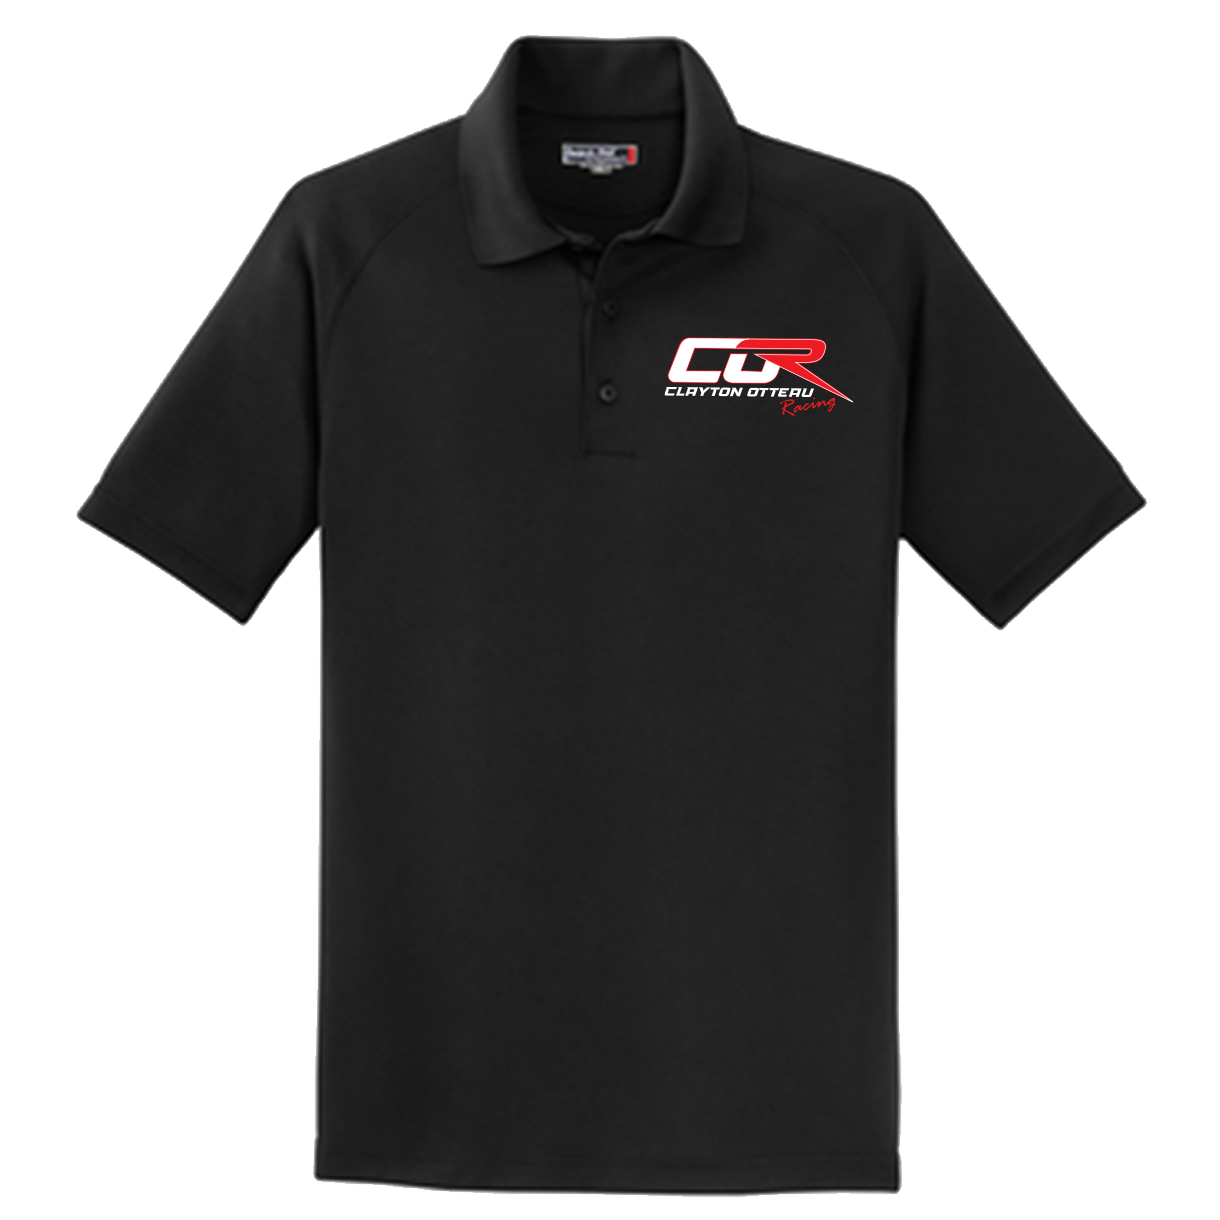 Clayton Otteau Embroidered Polo Shirt